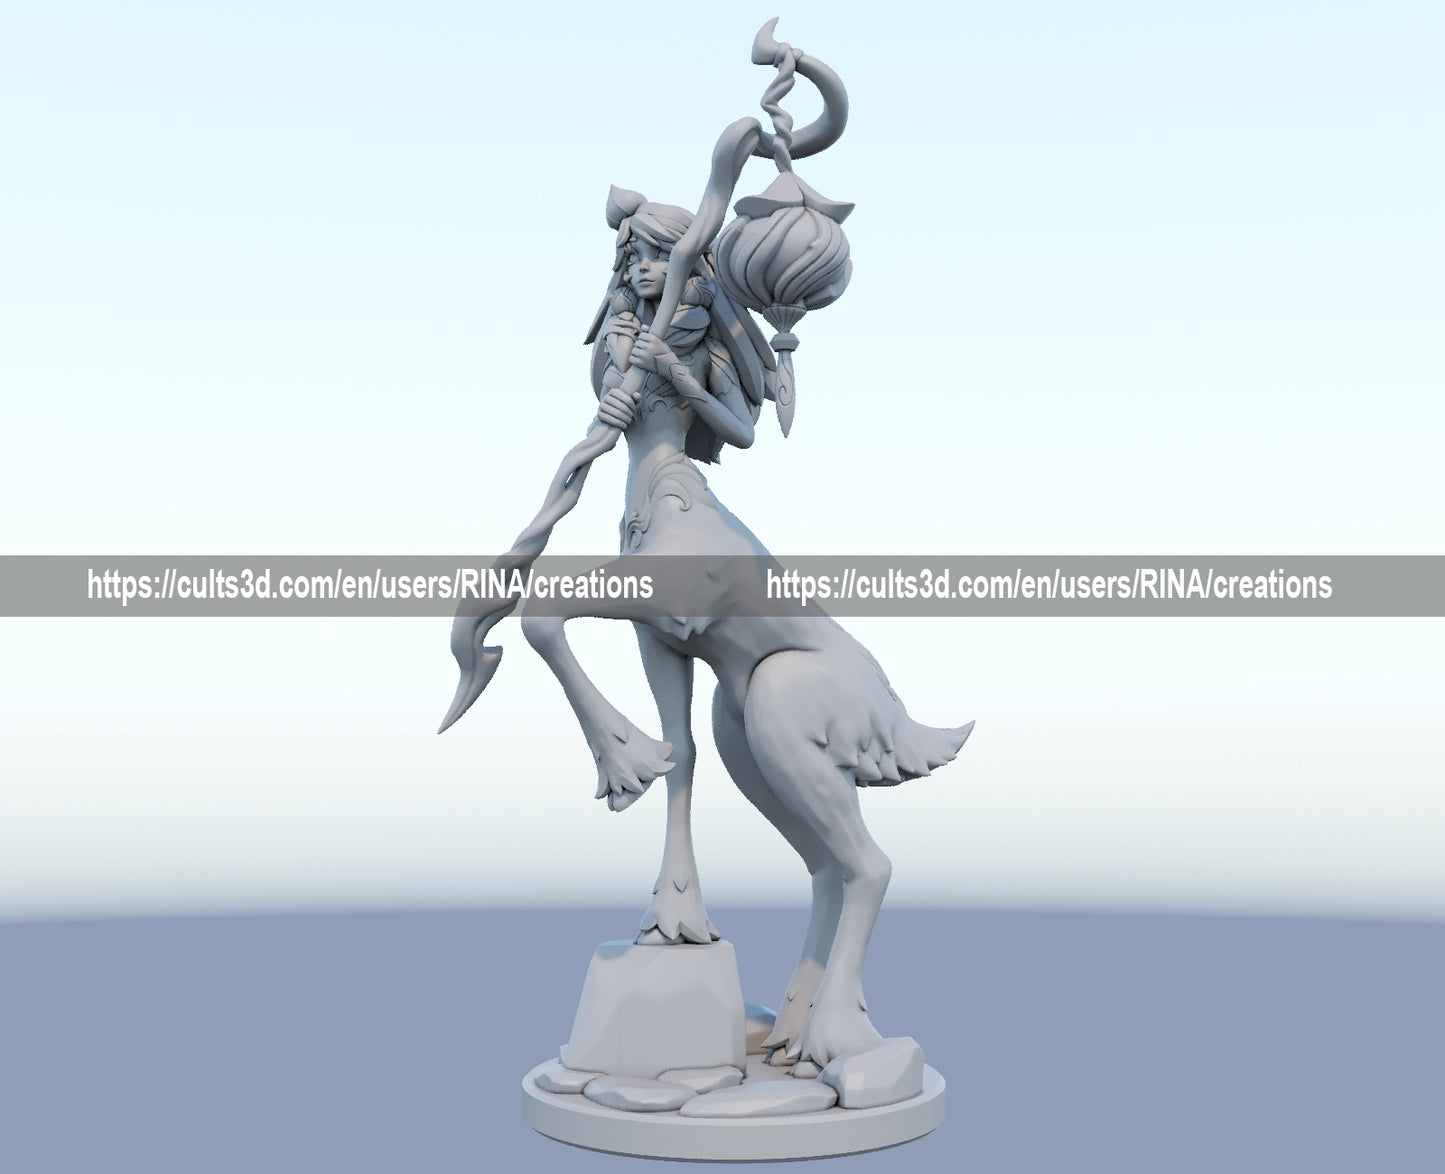 Lillia 3D-printed League of Legends champion figure. Decorate your gaming setup or home with your favorite League of Legends champion! Choose between the unpainted version, perfect for you to paint yourself, or the hand-painted version by a professional painter. Order your figure today!